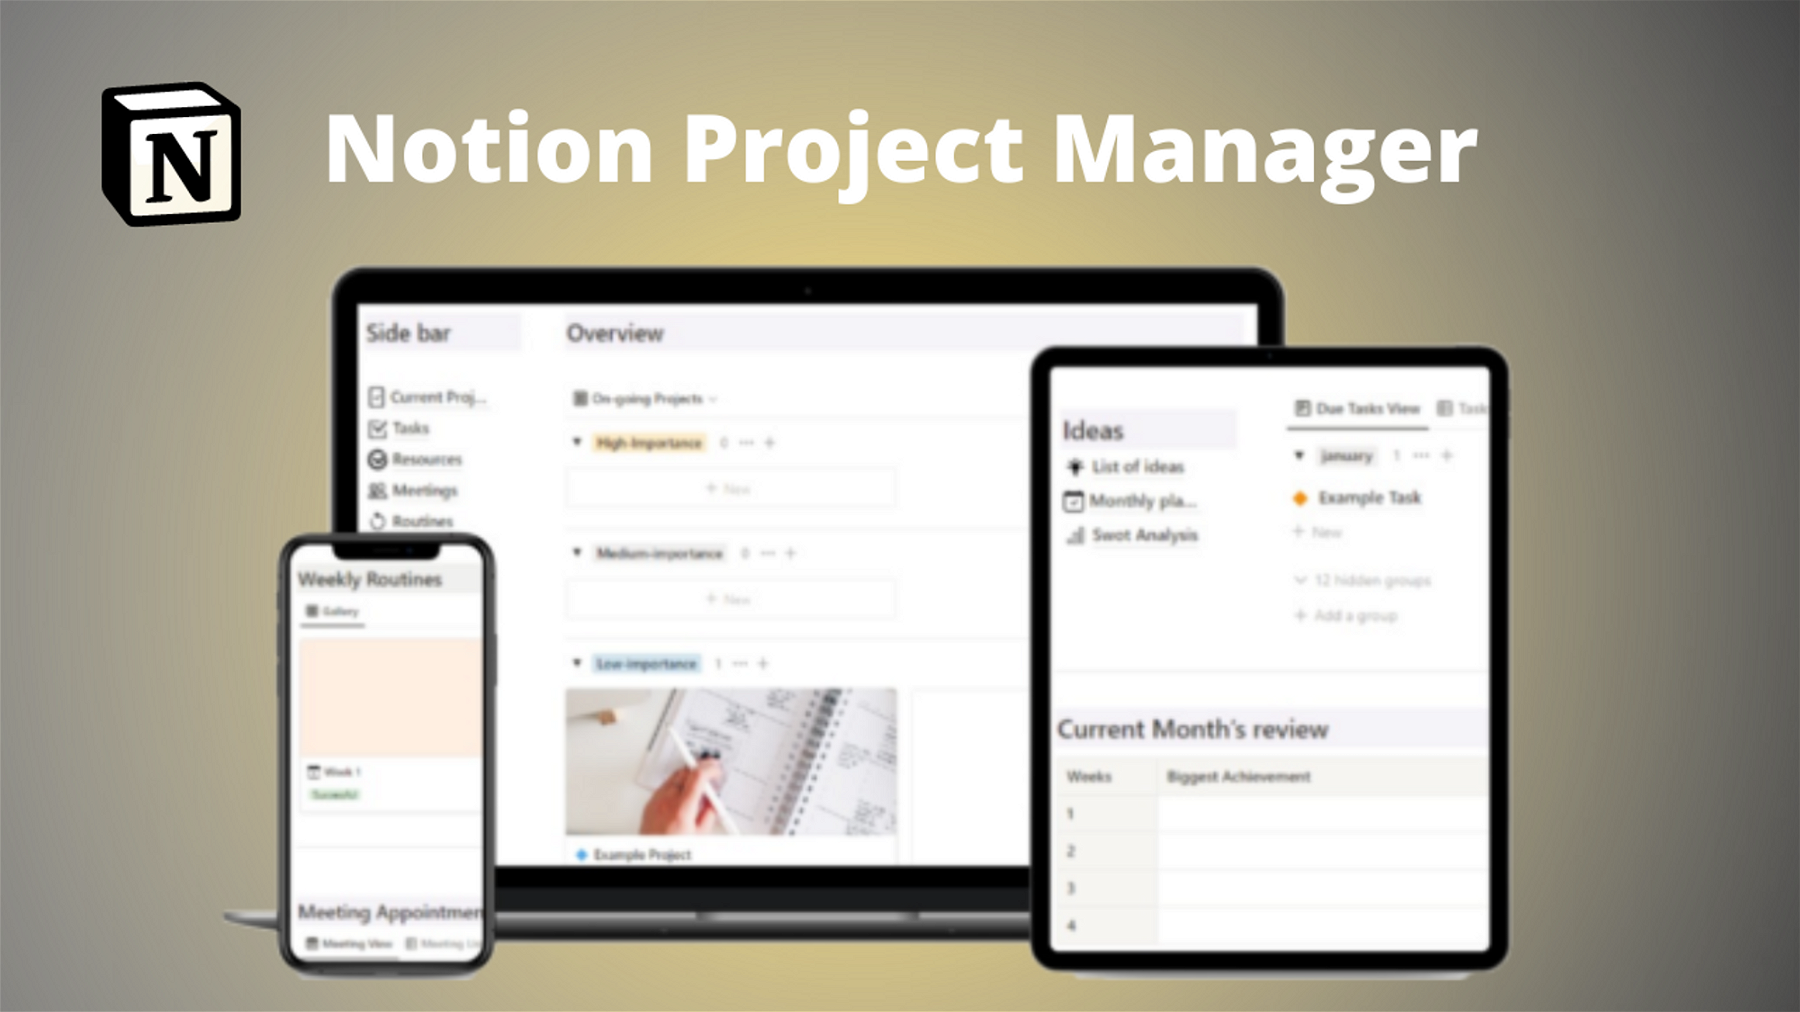 The All-In-One Notion Project Manager